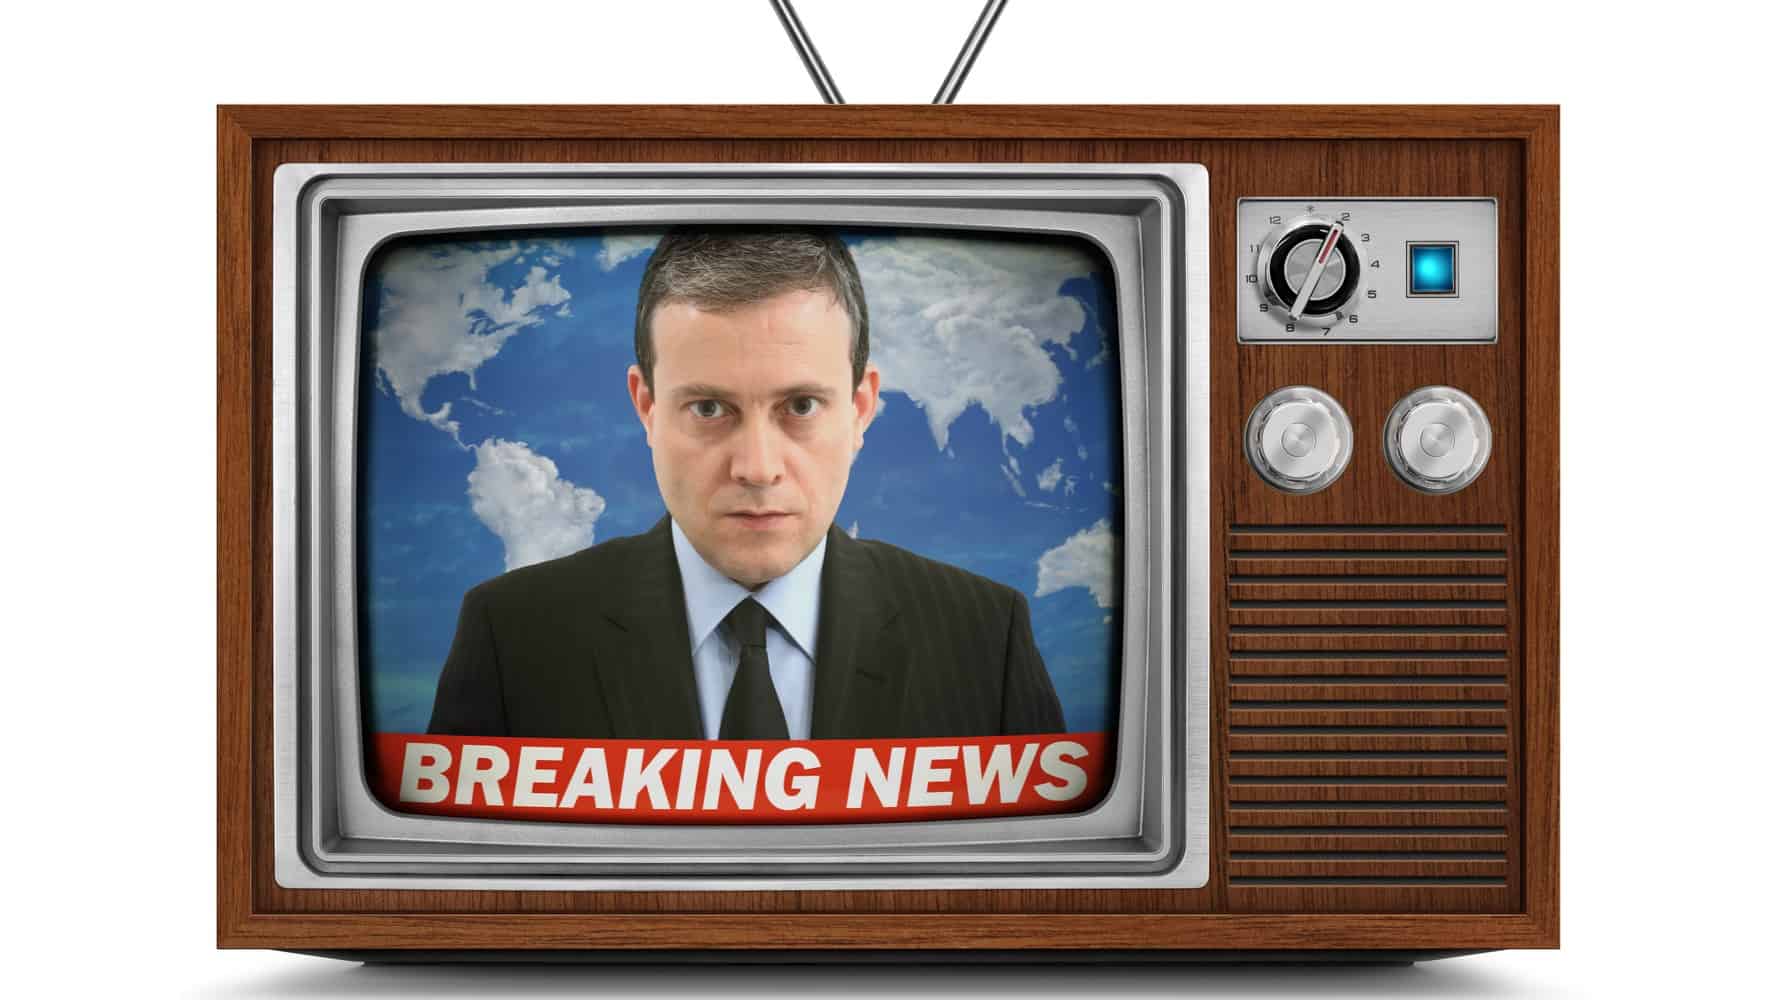 a newscaster appears in front of a world map with a 'Breaking News' flashing at the bottom of the screen of an old fashioned television receiver with dials.